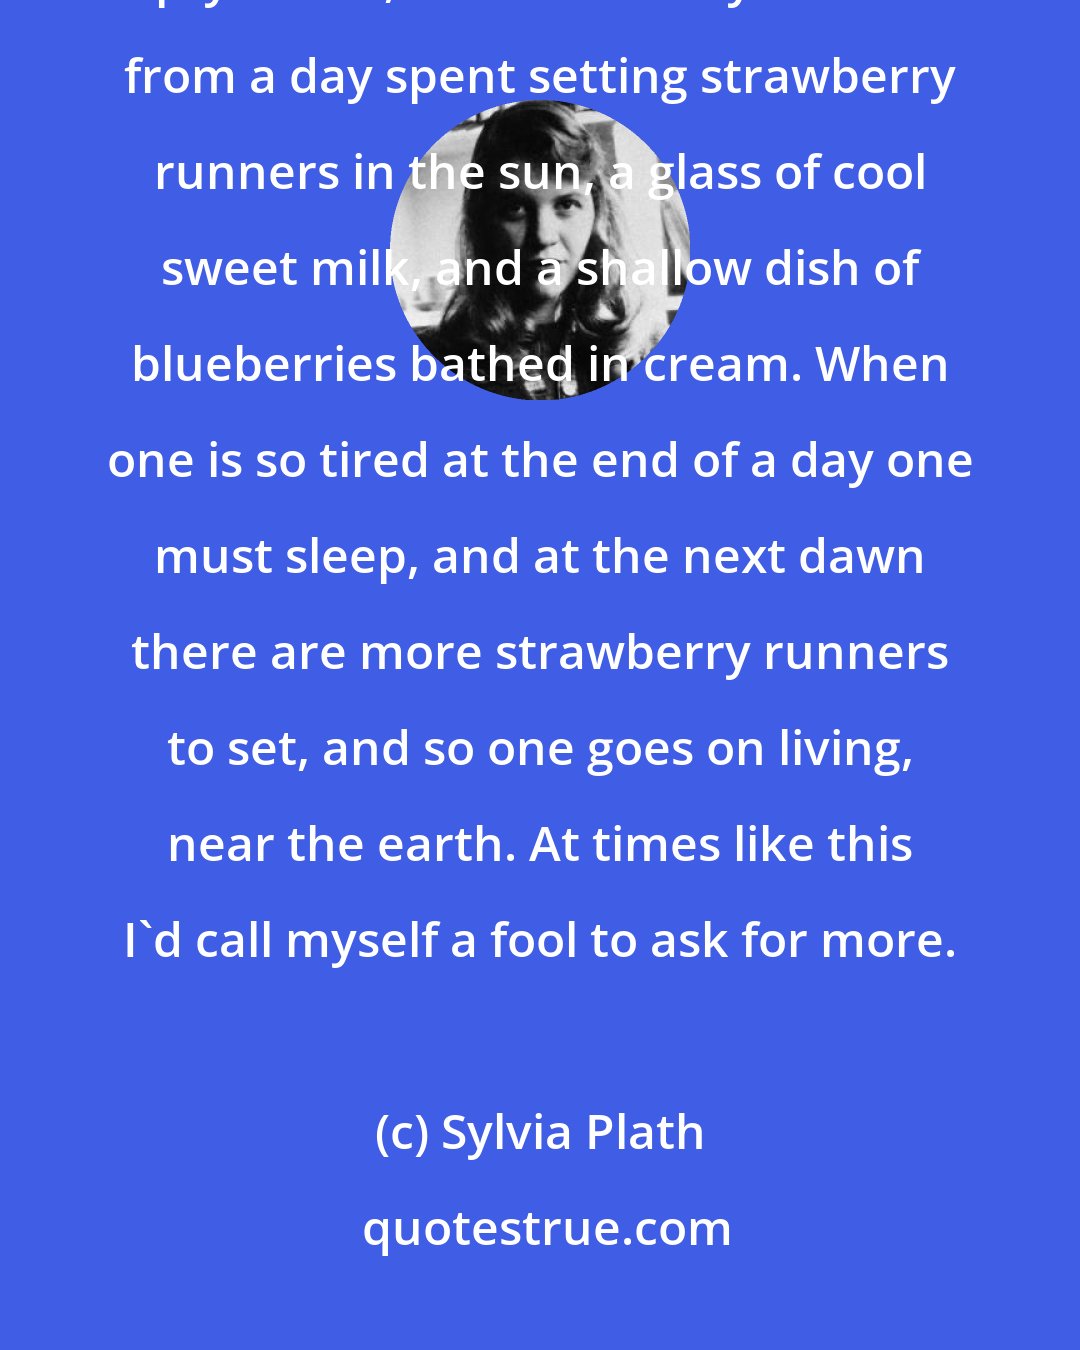 Sylvia Plath: I may never be happy, but tonight I am content. Nothing more than an empty house, the warm hazy weariness from a day spent setting strawberry runners in the sun, a glass of cool sweet milk, and a shallow dish of blueberries bathed in cream. When one is so tired at the end of a day one must sleep, and at the next dawn there are more strawberry runners to set, and so one goes on living, near the earth. At times like this I'd call myself a fool to ask for more.